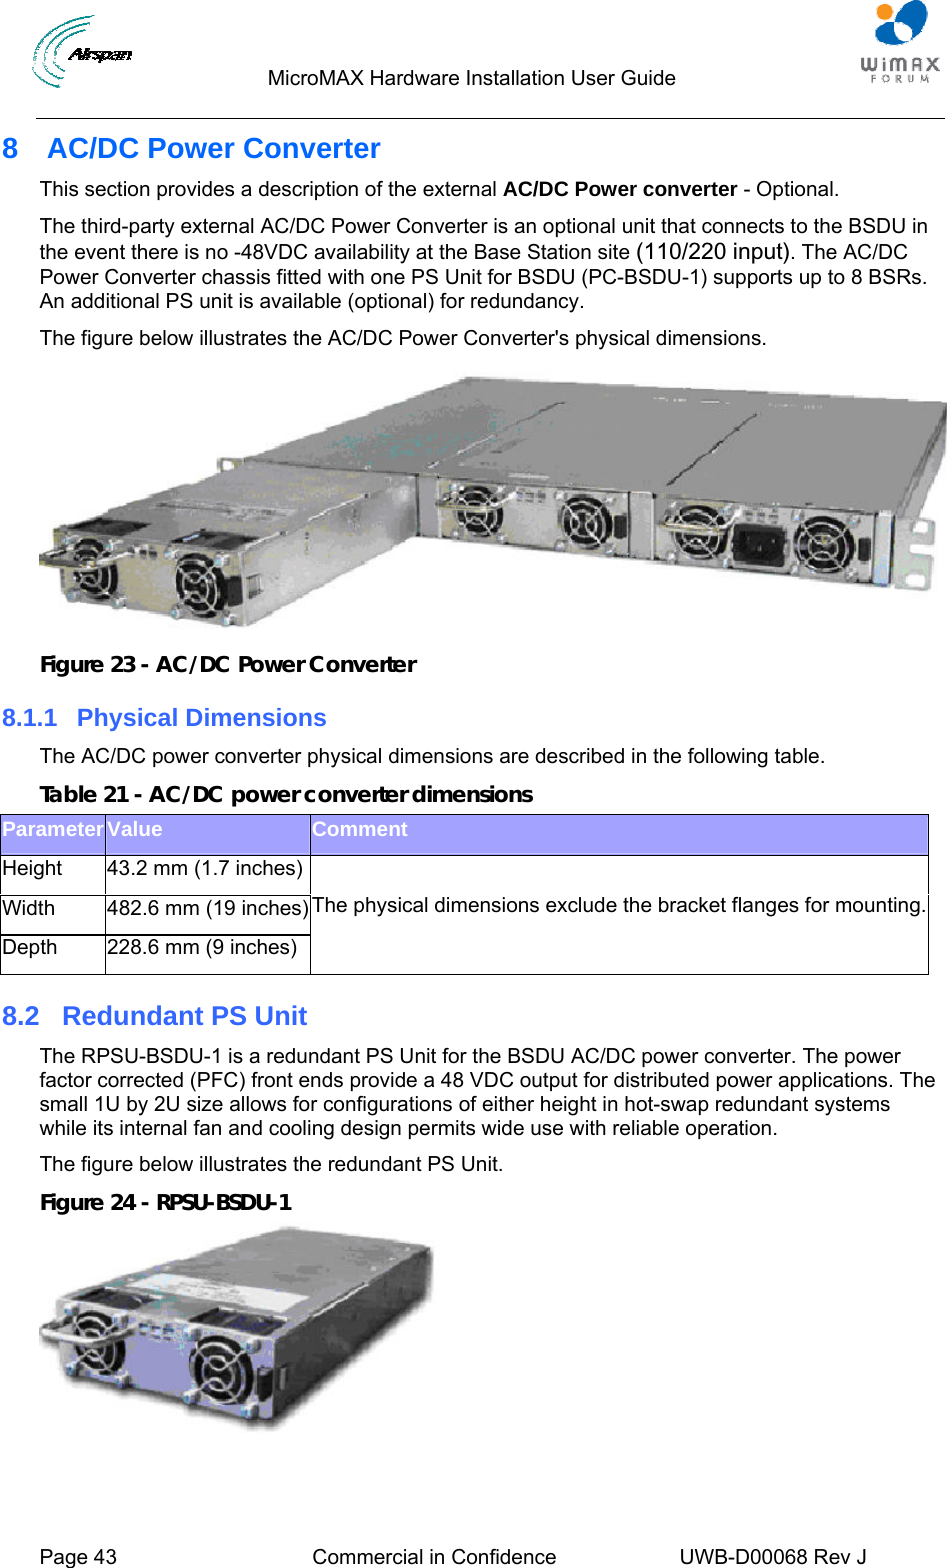                                  MicroMAX Hardware Installation User Guide     Page 43  Commercial in Confidence  UWB-D00068 Rev J   8  AC/DC Power Converter This section provides a description of the external AC/DC Power converter - Optional. The third-party external AC/DC Power Converter is an optional unit that connects to the BSDU in the event there is no -48VDC availability at the Base Station site (110/220 input). The AC/DC Power Converter chassis fitted with one PS Unit for BSDU (PC-BSDU-1) supports up to 8 BSRs. An additional PS unit is available (optional) for redundancy. The figure below illustrates the AC/DC Power Converter&apos;s physical dimensions.  Figure 23 - AC/DC Power Converter 8.1.1 Physical Dimensions The AC/DC power converter physical dimensions are described in the following table. Table 21 - AC/DC power converter dimensions Parameter Value  Comment Height  43.2 mm (1.7 inches) Width  482.6 mm (19 inches) Depth  228.6 mm (9 inches)  The physical dimensions exclude the bracket flanges for mounting.8.2  Redundant PS Unit The RPSU-BSDU-1 is a redundant PS Unit for the BSDU AC/DC power converter. The power factor corrected (PFC) front ends provide a 48 VDC output for distributed power applications. The small 1U by 2U size allows for configurations of either height in hot-swap redundant systems while its internal fan and cooling design permits wide use with reliable operation. The figure below illustrates the redundant PS Unit. Figure 24 - RPSU-BSDU-1  